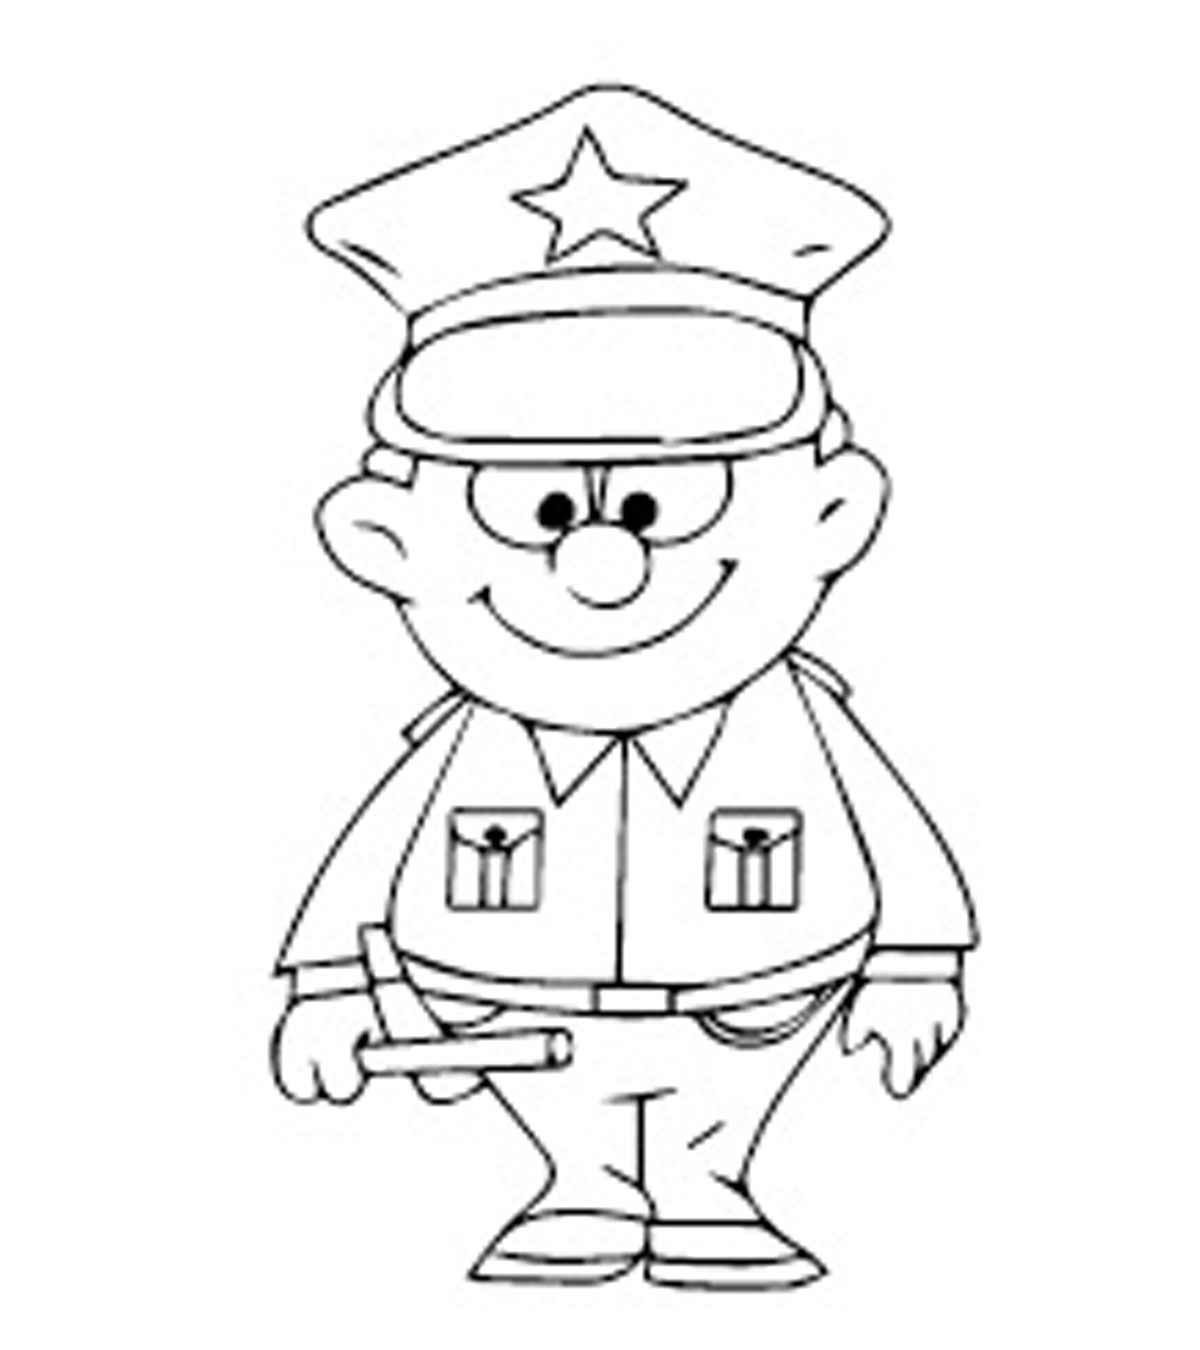 police coloring page police officer coloring pages to download and print for free page police coloring 